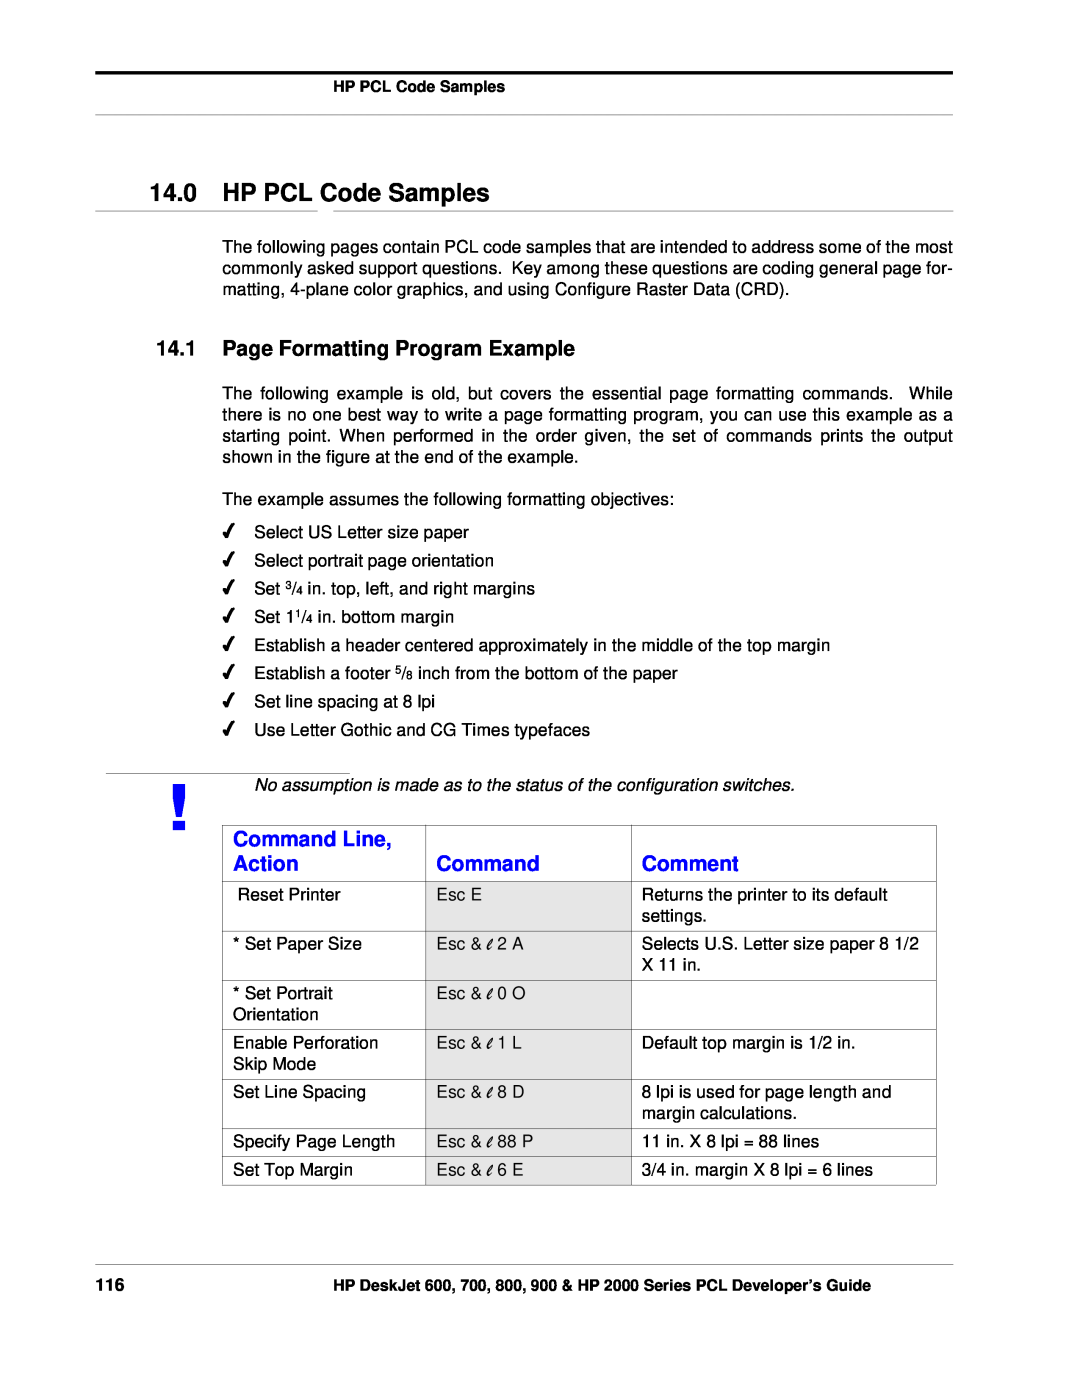 HP 800, 700 manual HP PCL Code Samples, Page Formatting Program Example, Command Line, Action, Comment 